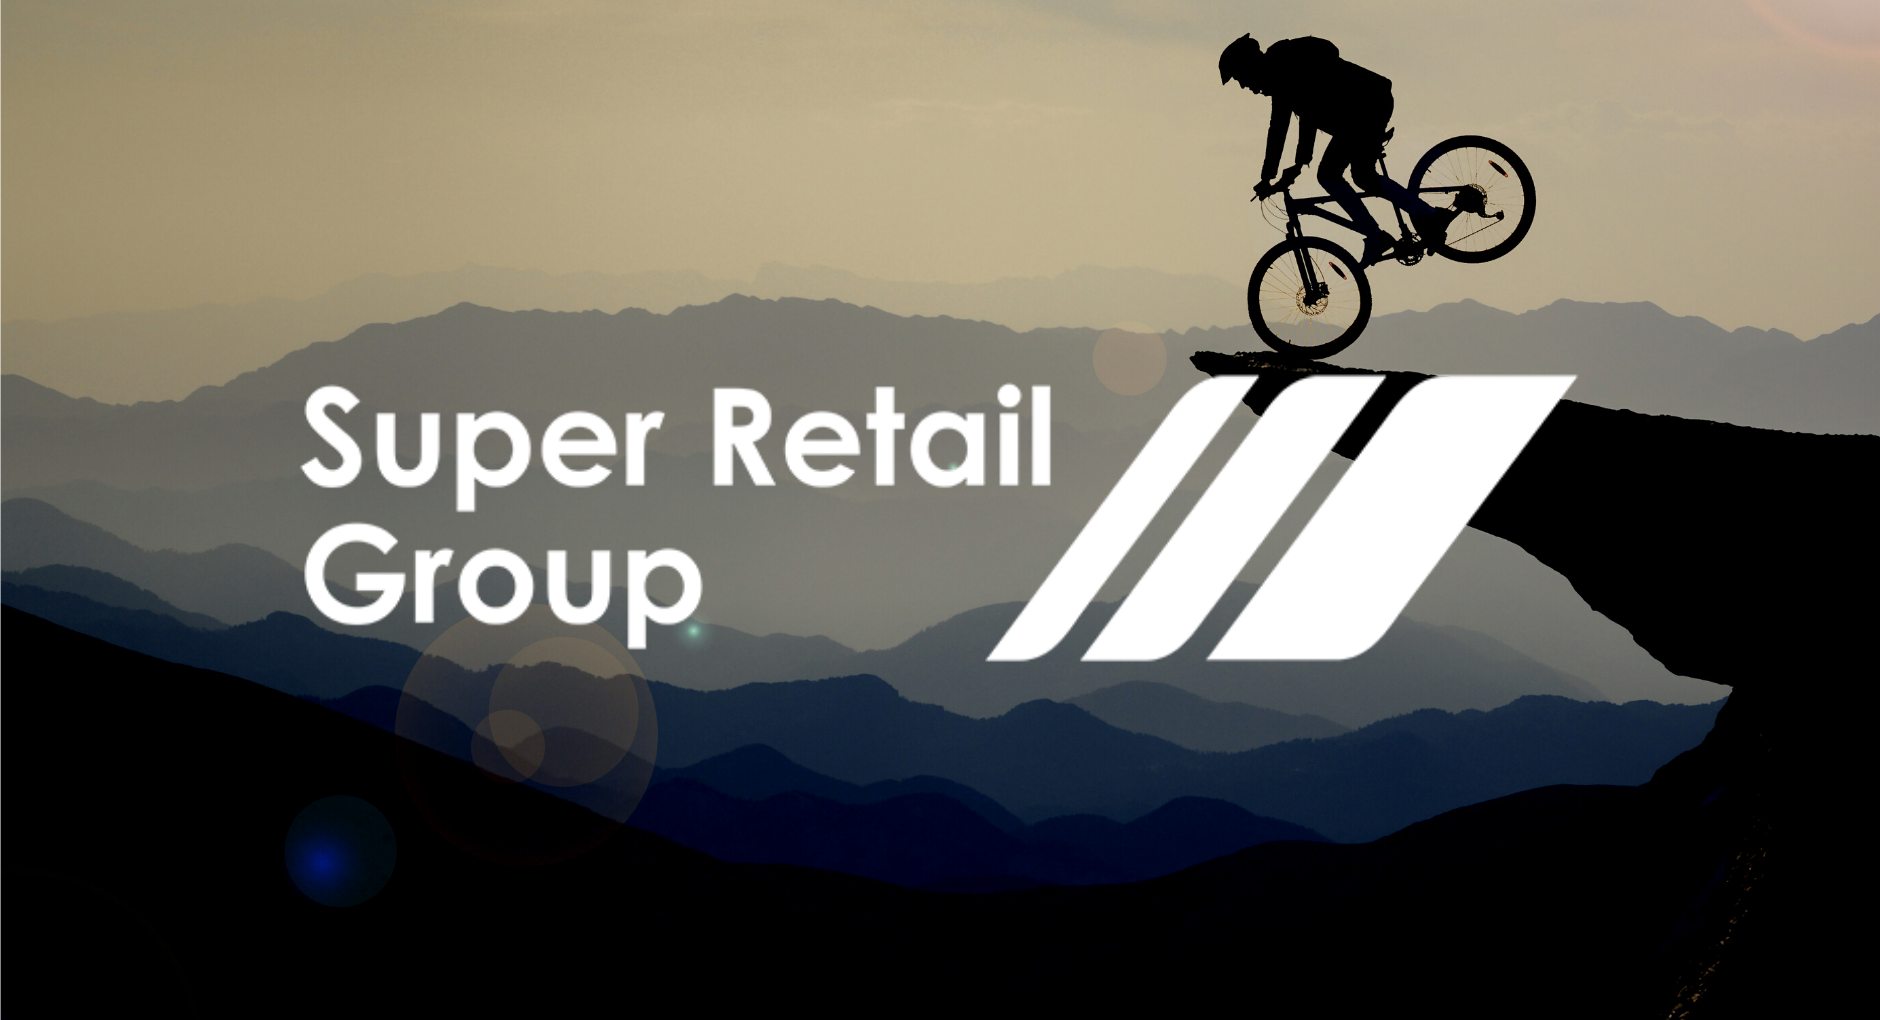 Stock in Focus: Super Retail Group. It’s all about sustainable after-tax cash earnings.